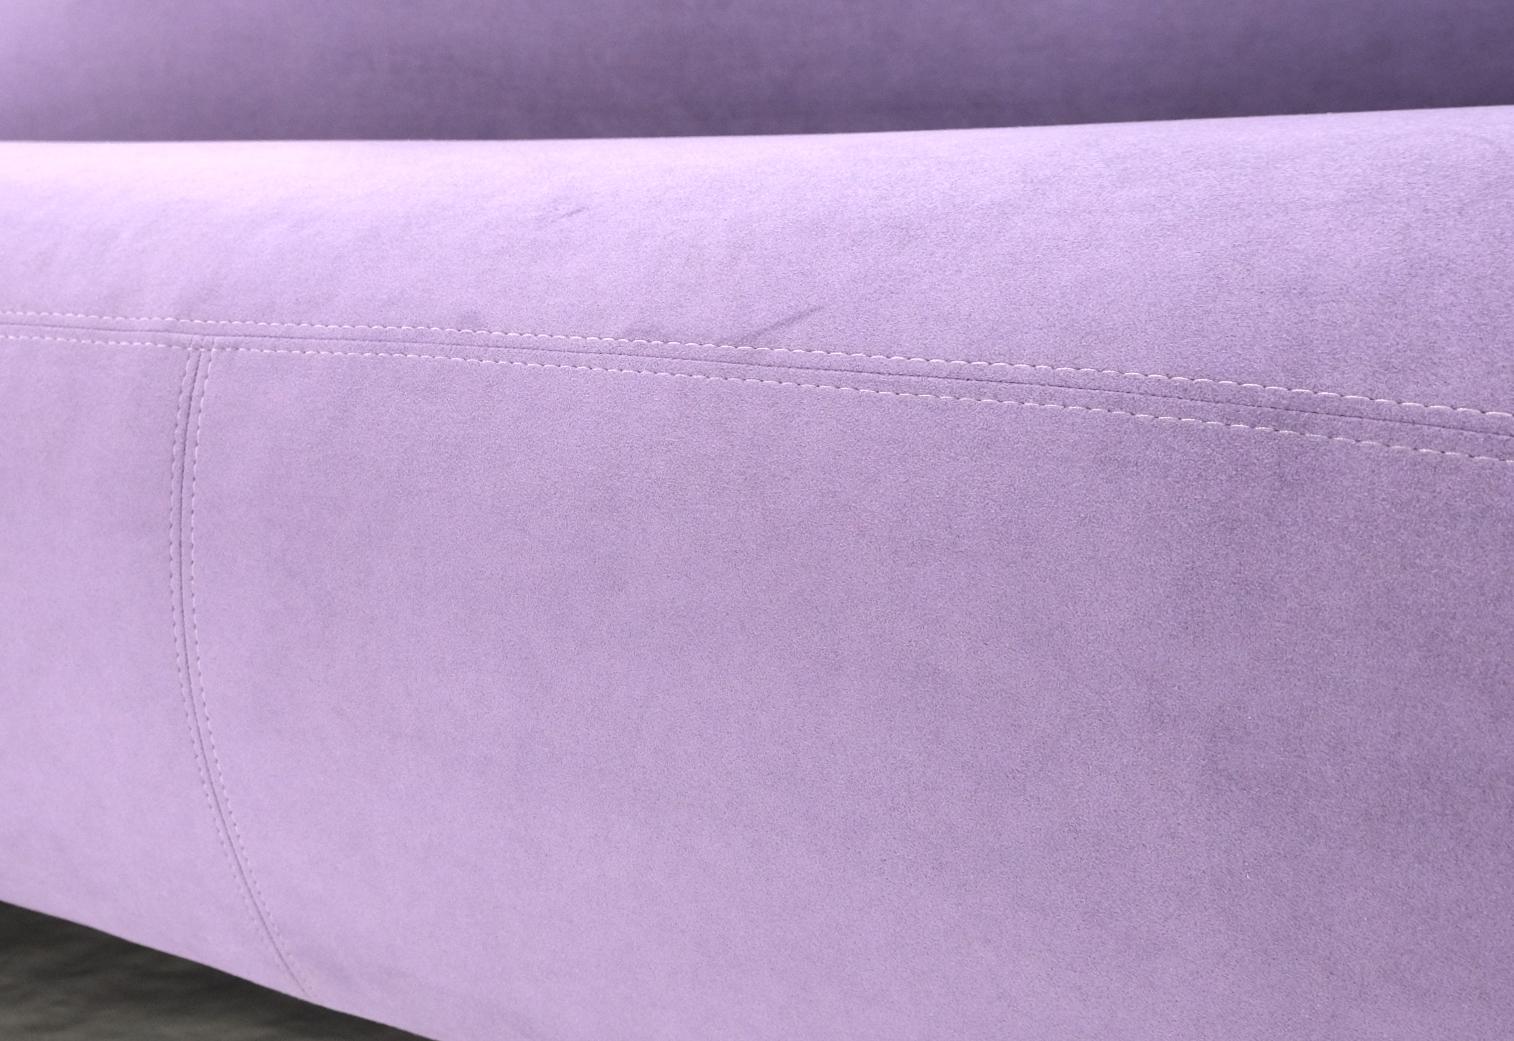 Mid-Century Modern Lavender Ultra Suede Cloud Sofa Chaise Lounge by Weiman  For Sale